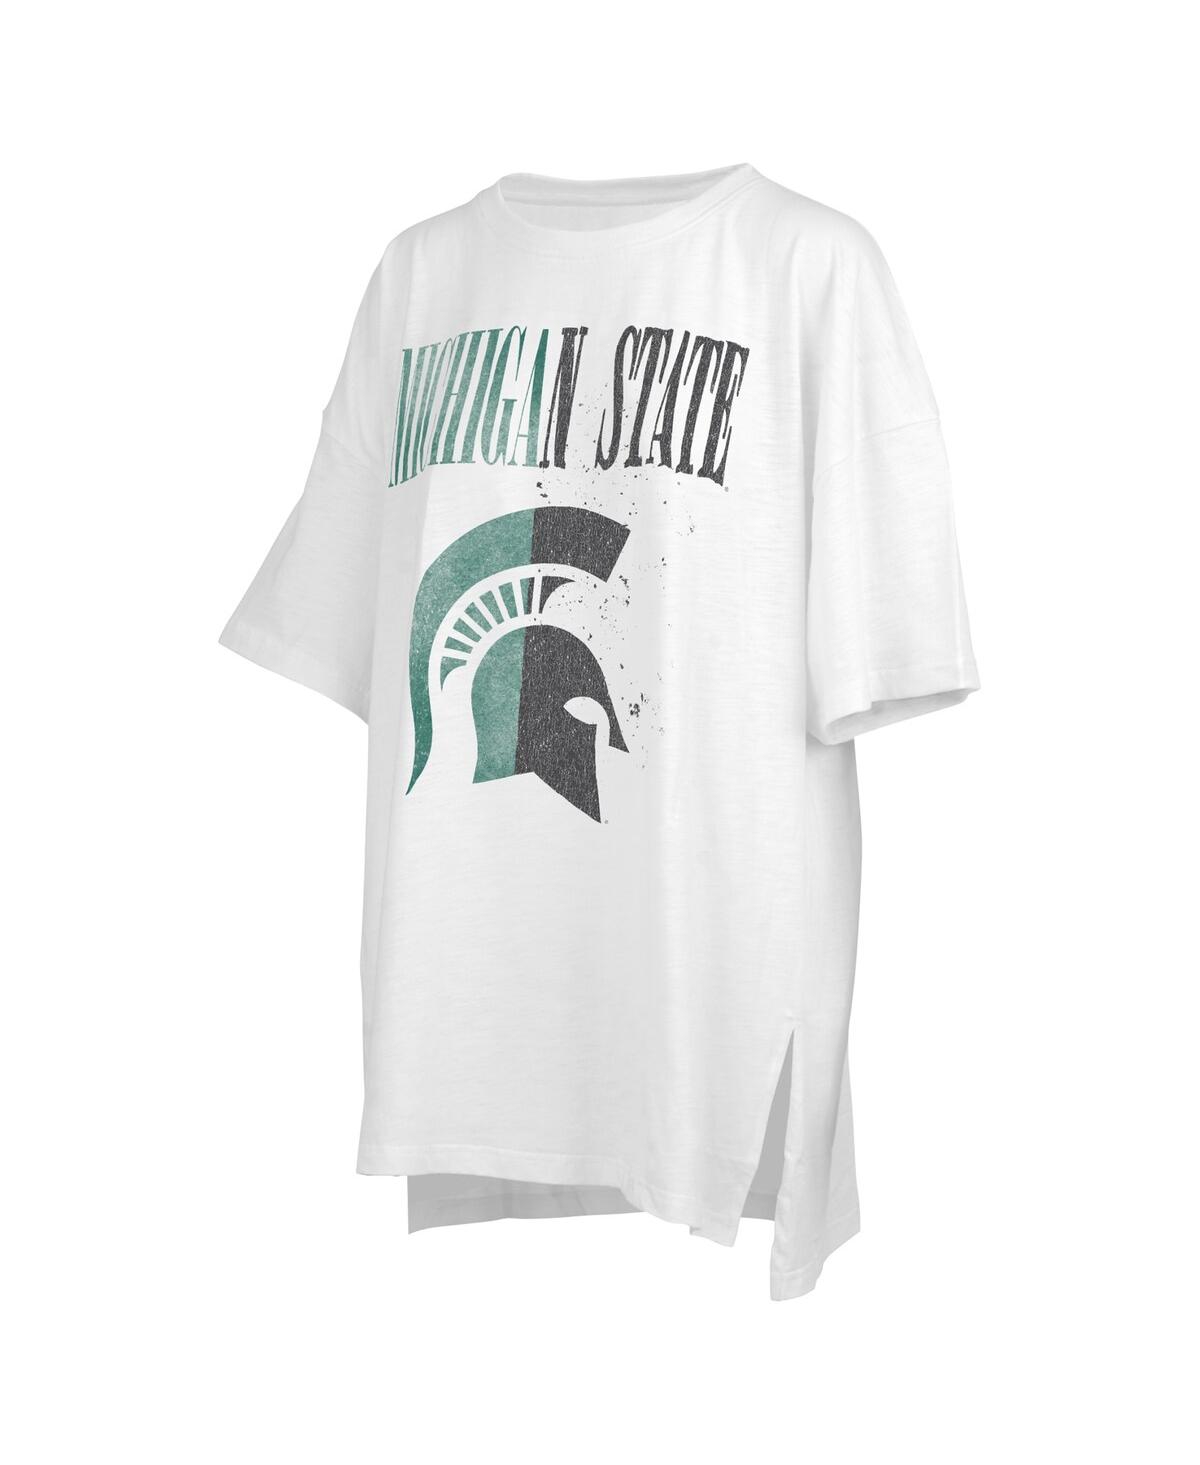 Shop Pressbox Women's  White Distressed Michigan State Spartans Motley Crew Andy Waist Length Oversized T-